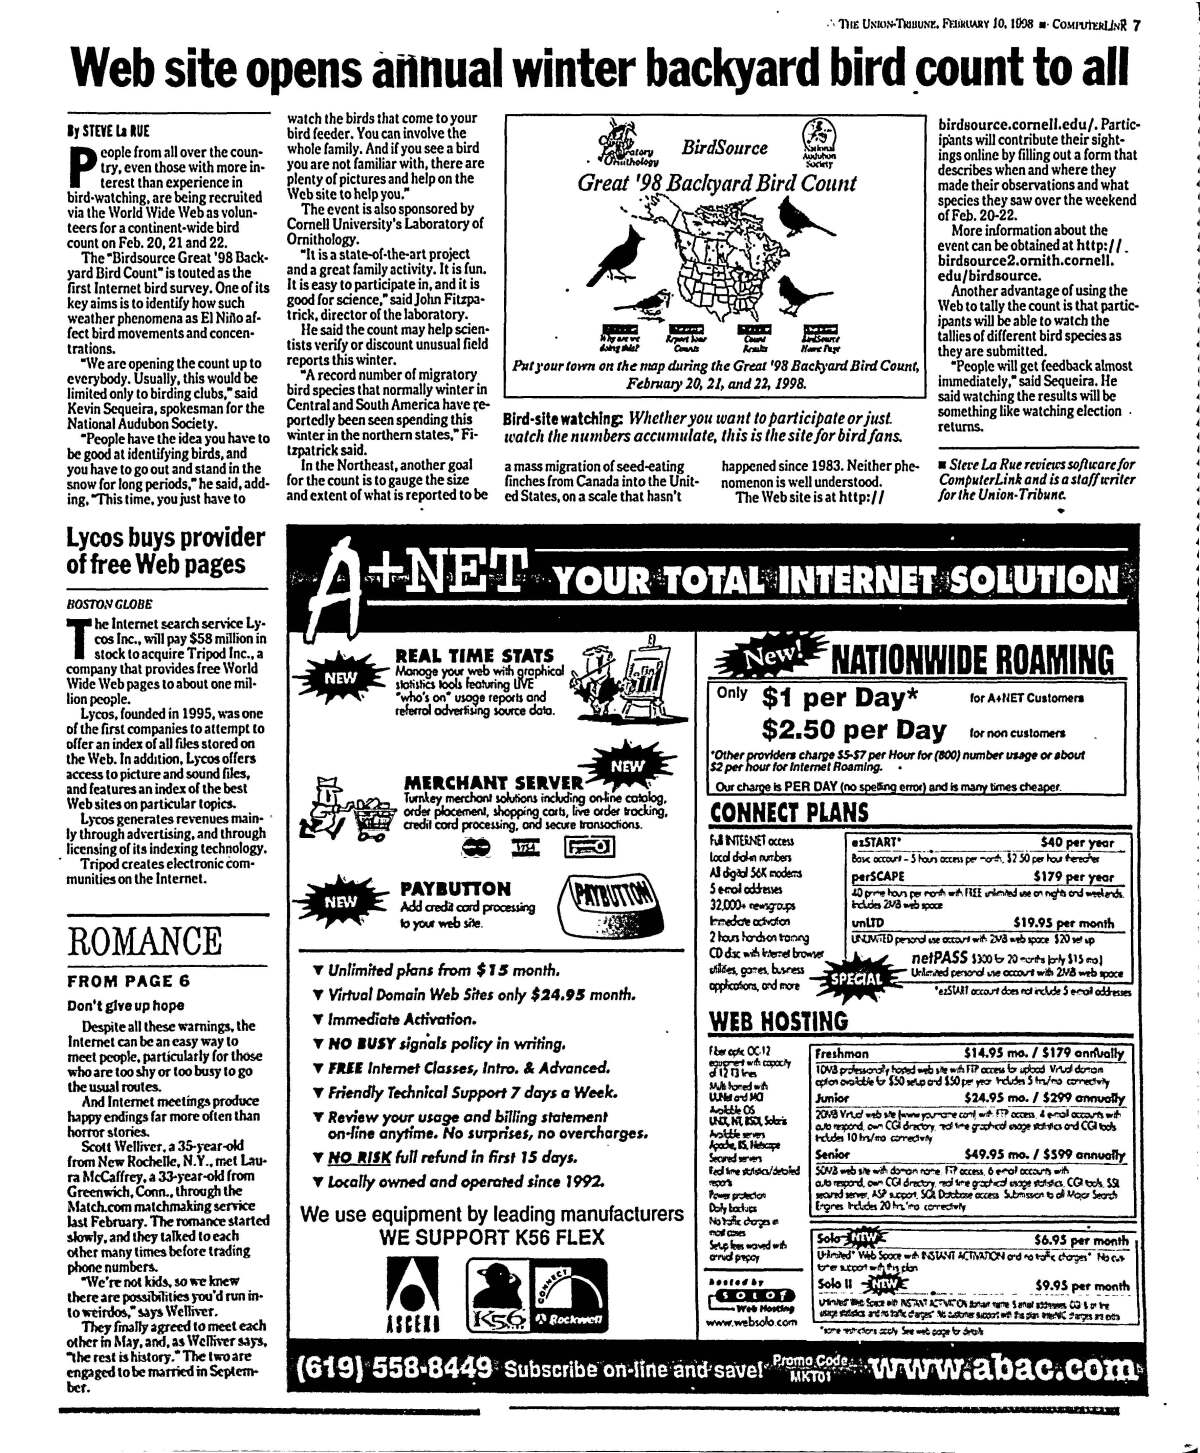 An article on the Great '98 Backyard Bird Count published in The San Diego Union-Tribune, February 10, 1998.